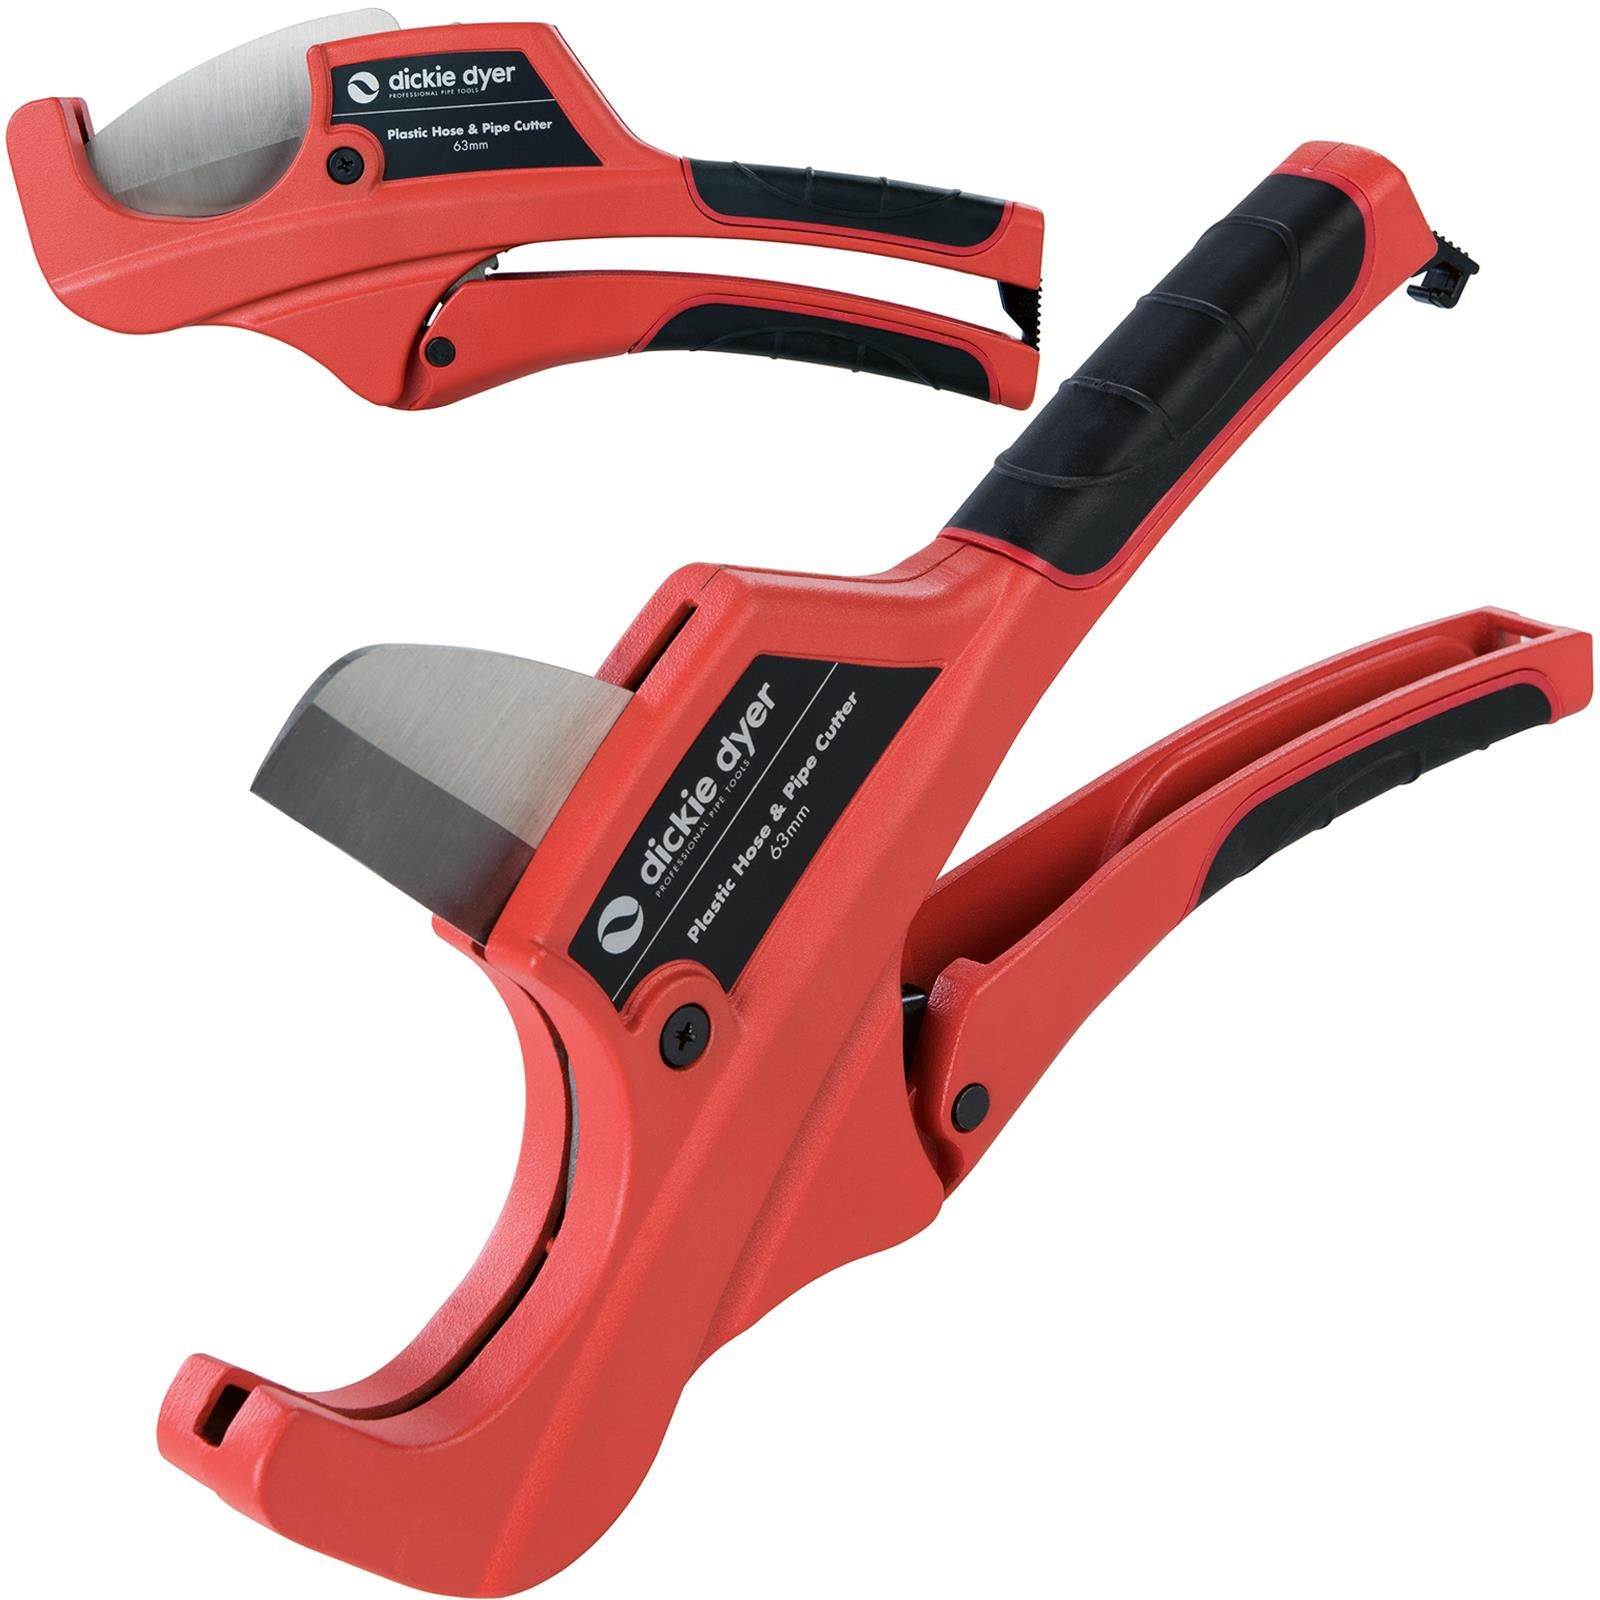 Dickie Dyer Plastic Hose and Pipe Cutter 63mm